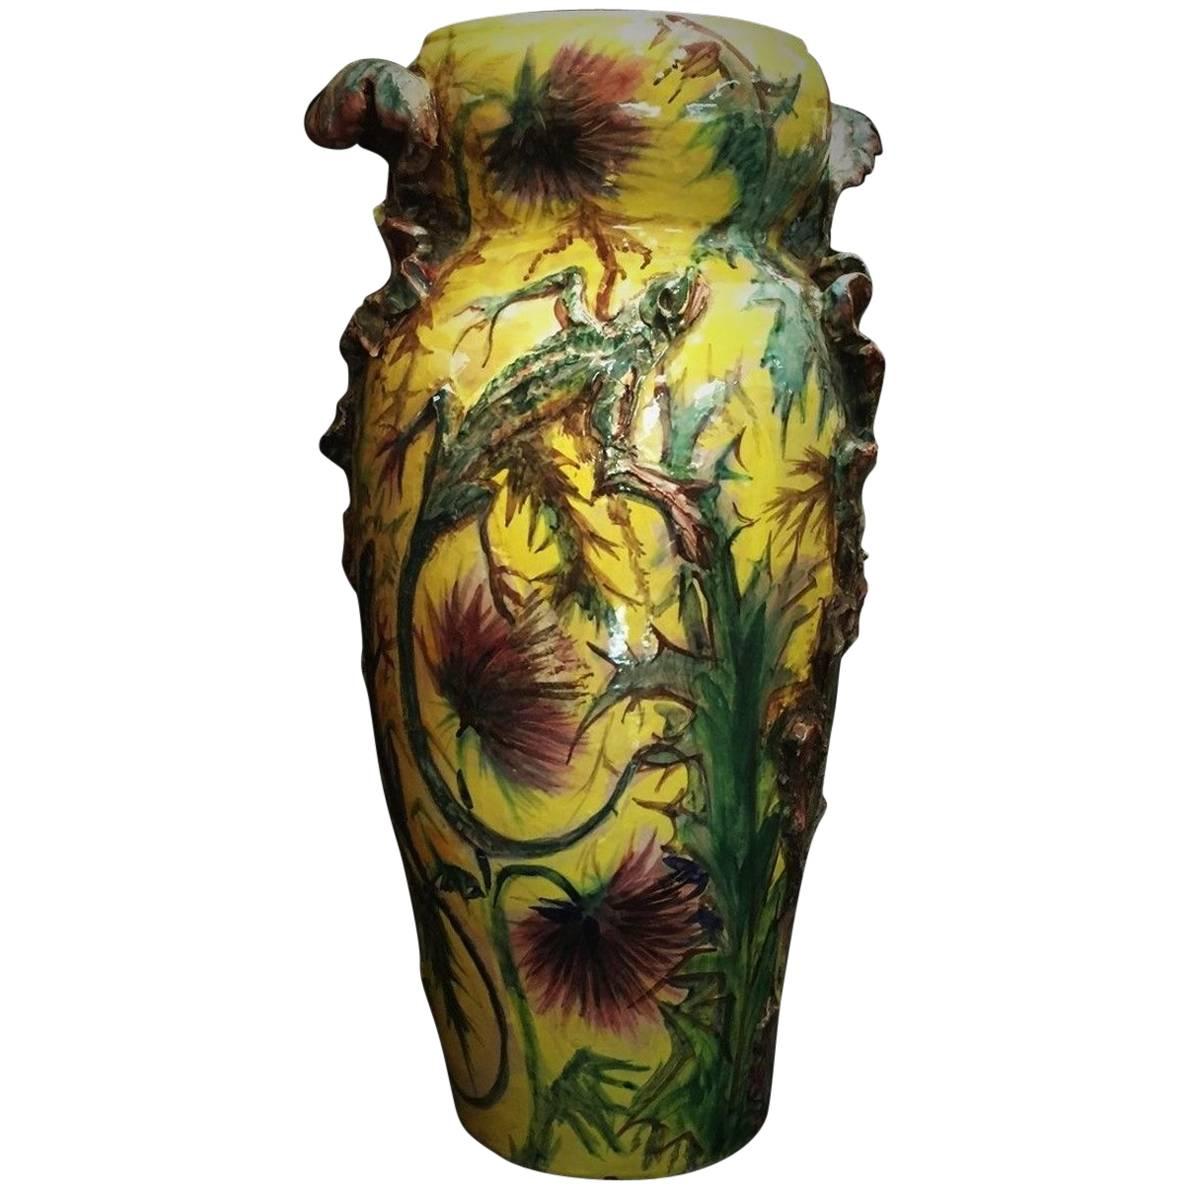 French Art Nouveau Majolica Vase with Thistles and Lizards, circa 1900